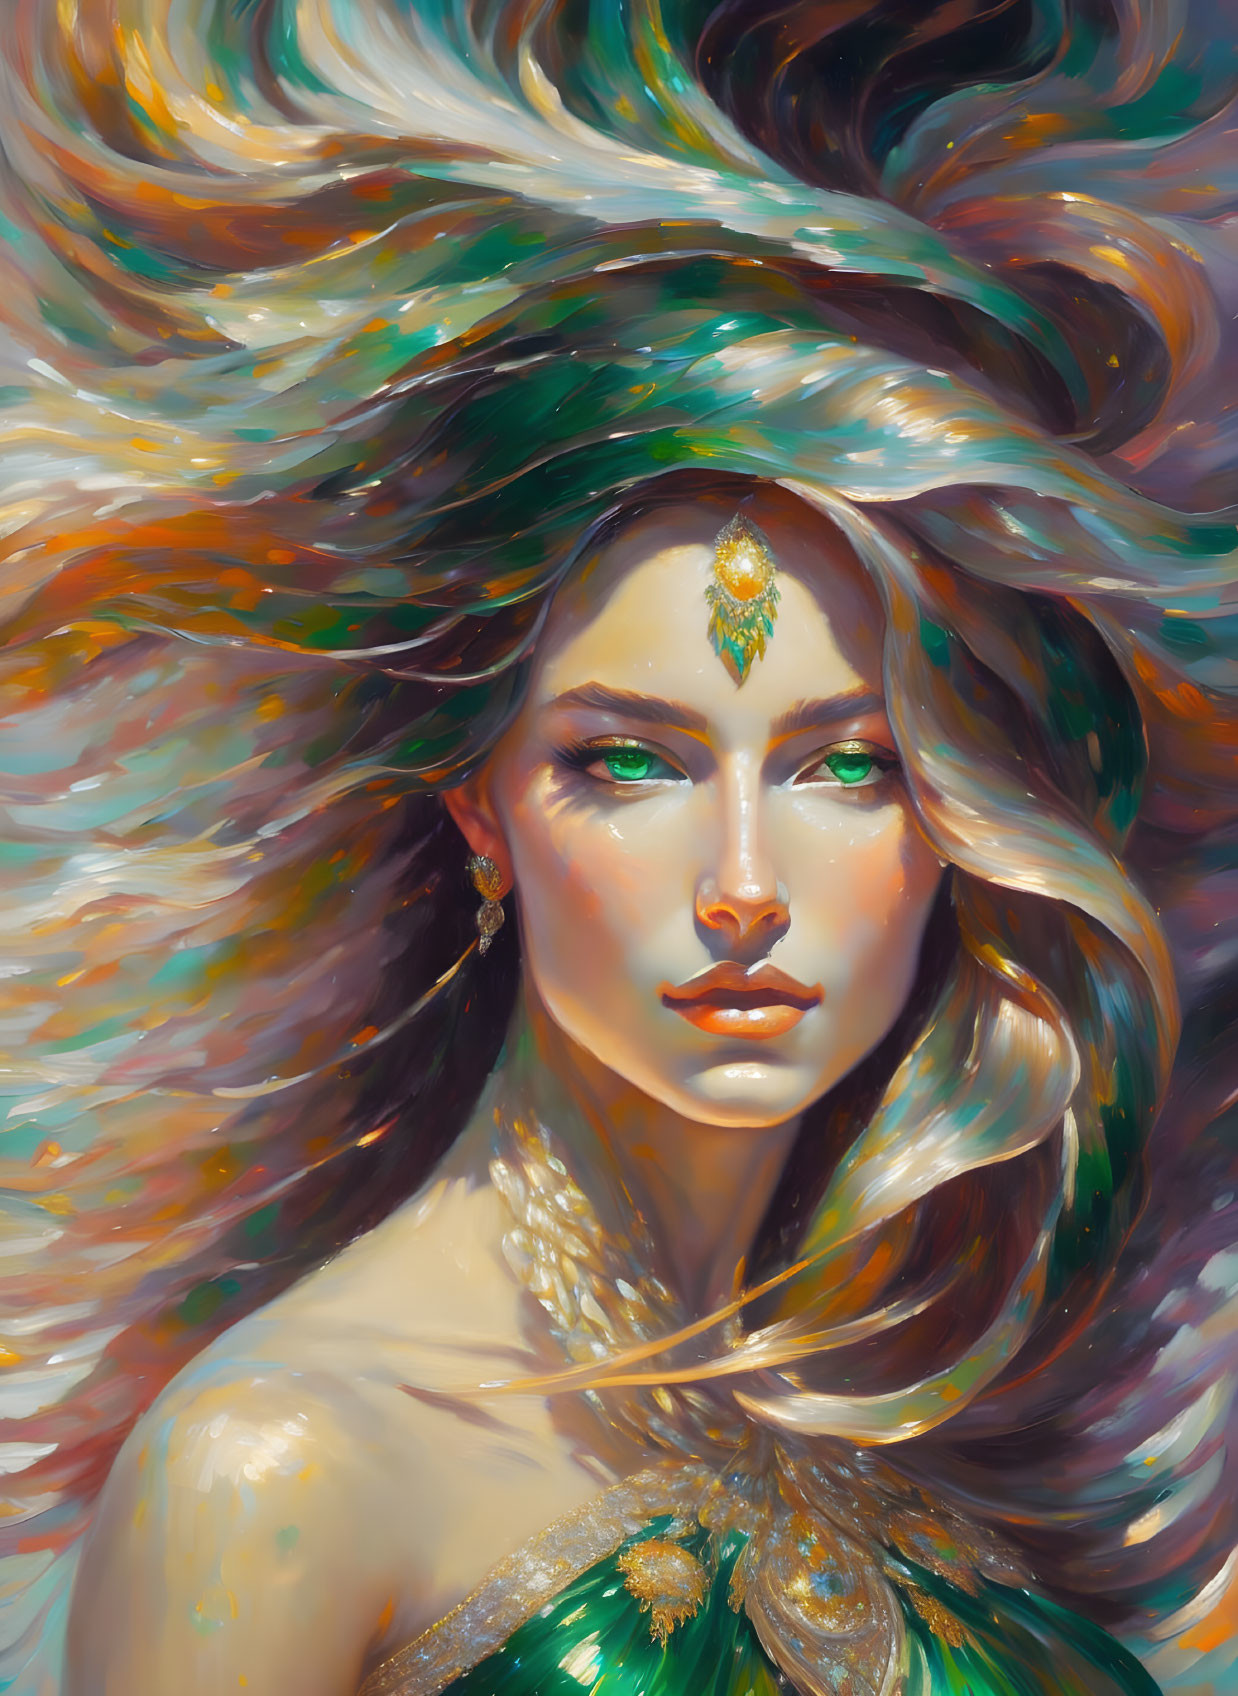 Vibrant fantasy portrait of a woman with flowing hair and intricate jewelry